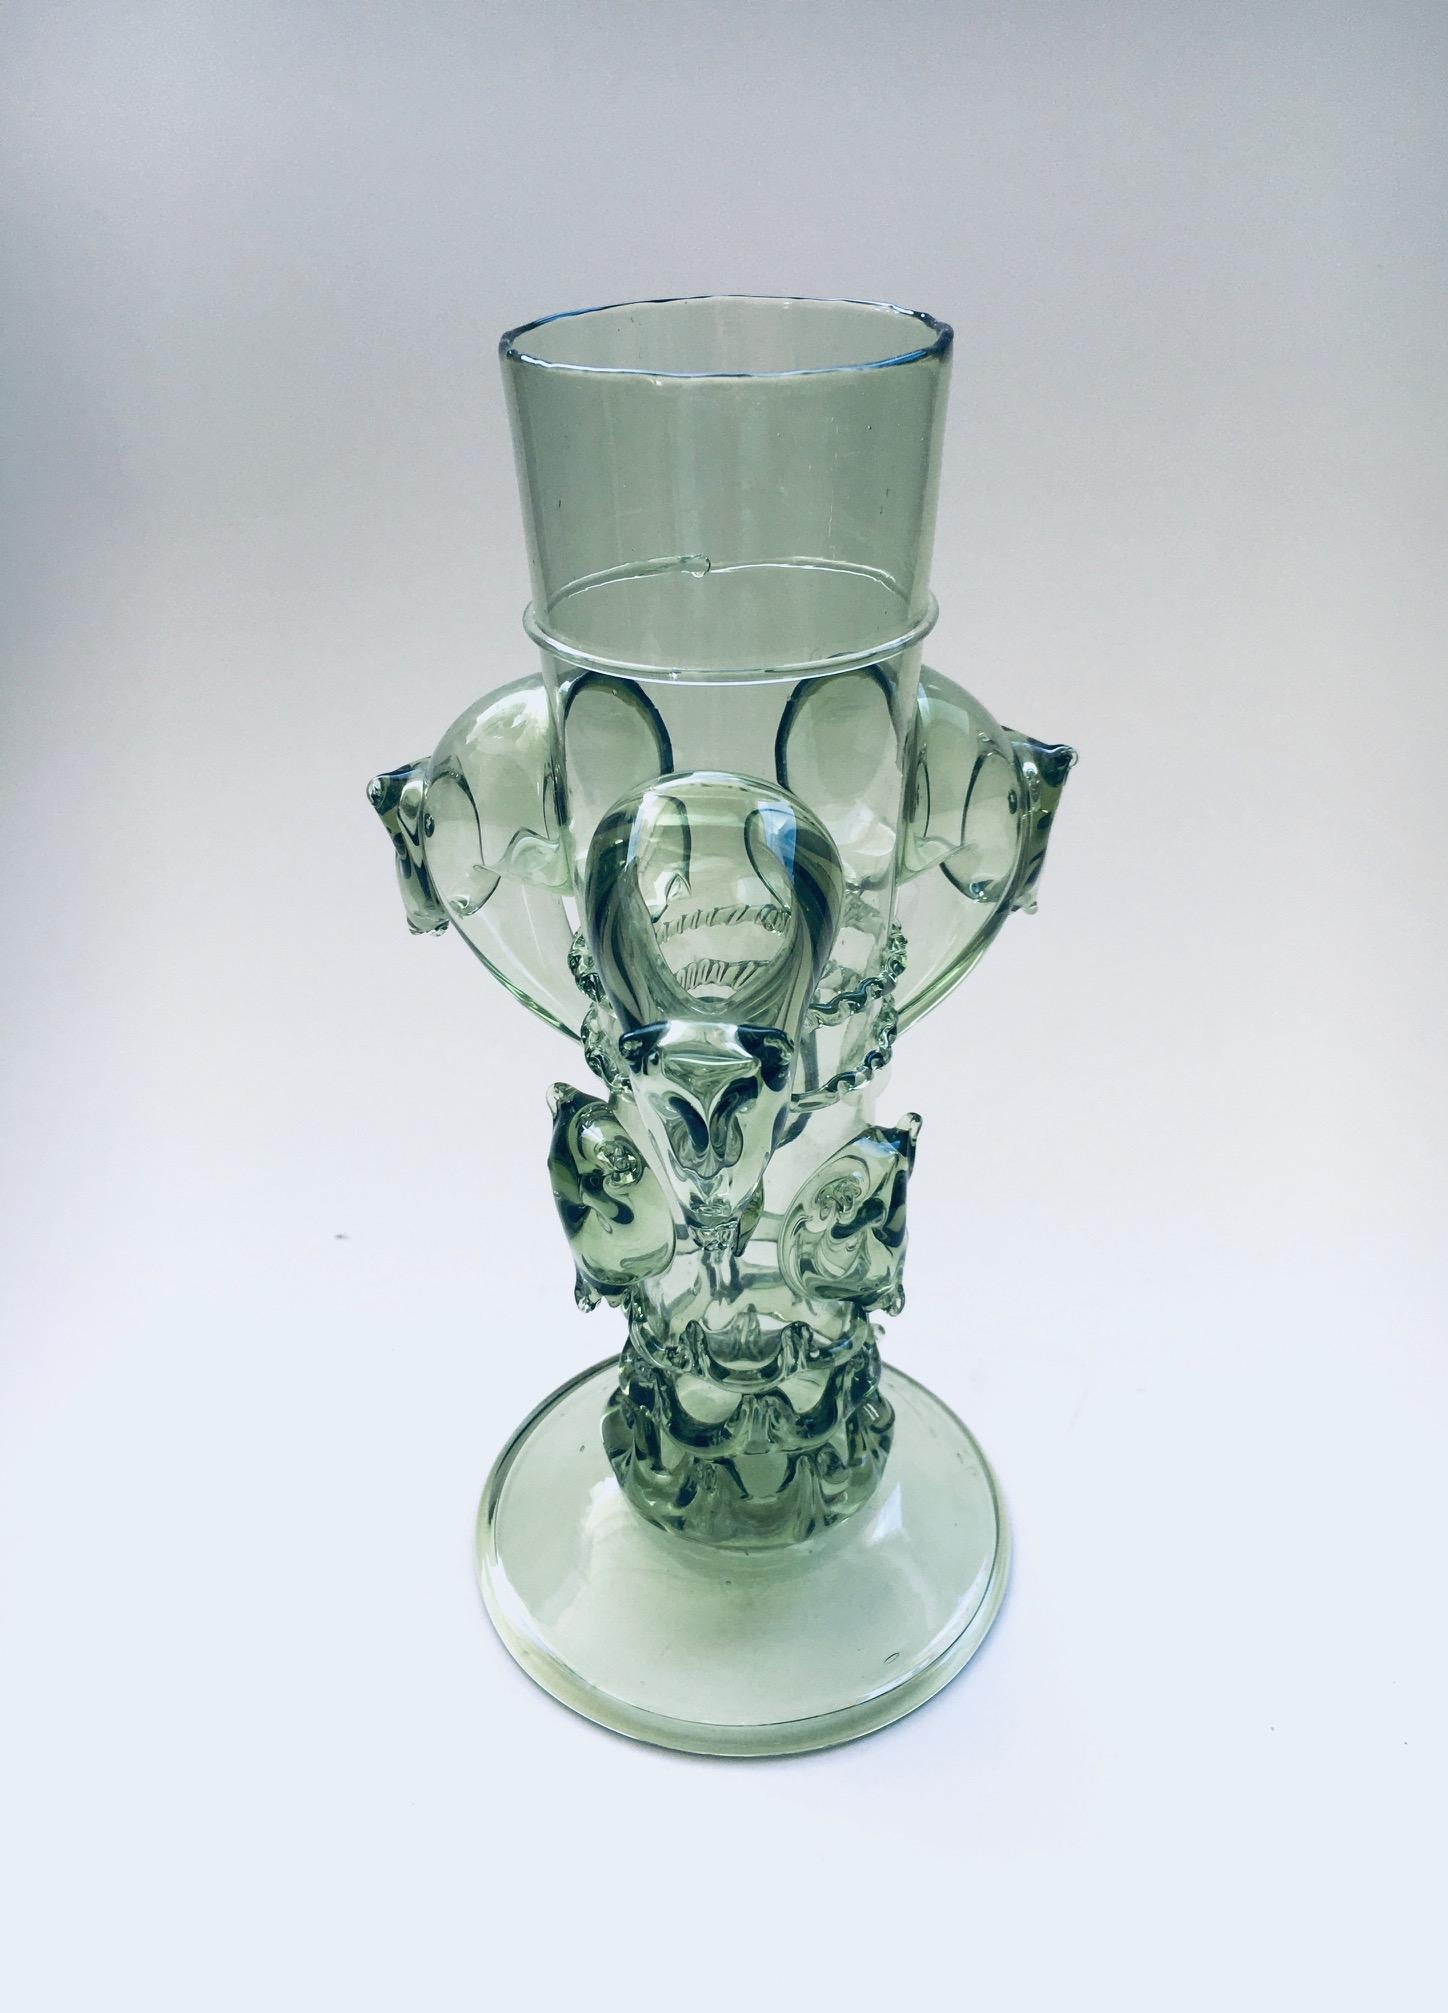 Other Early 20th Century Italian Design Intricate Art Glass Vase For Sale